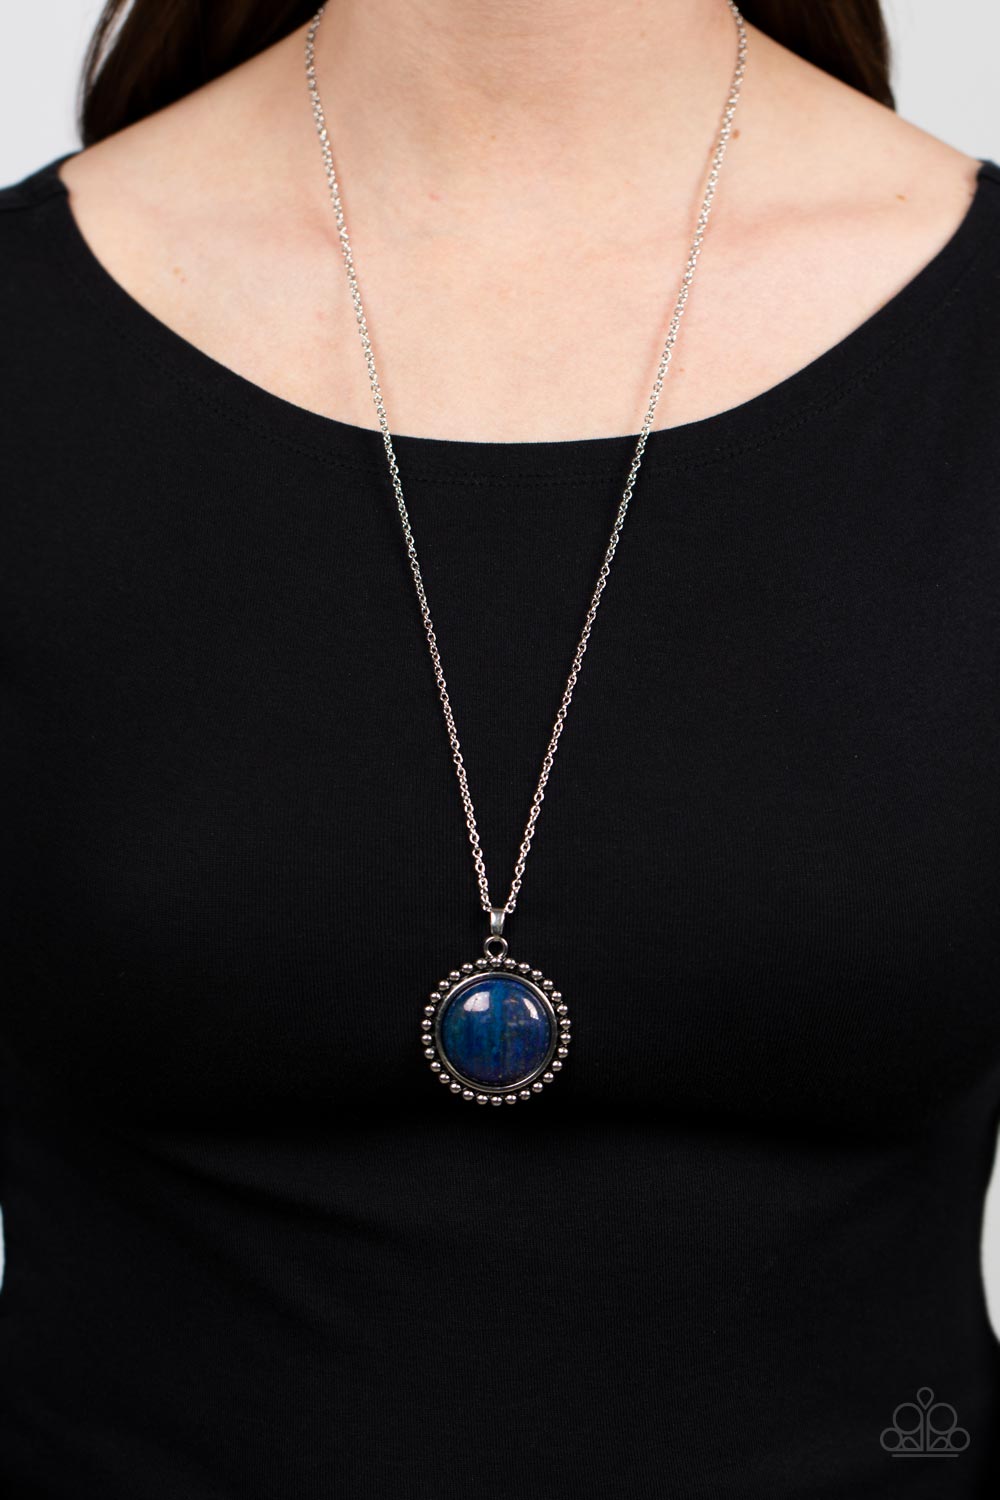 Sonoran Summer - Blue Lapis Stone/Studded Silver Frame Pendant Paparazzi Necklace & matching earrings